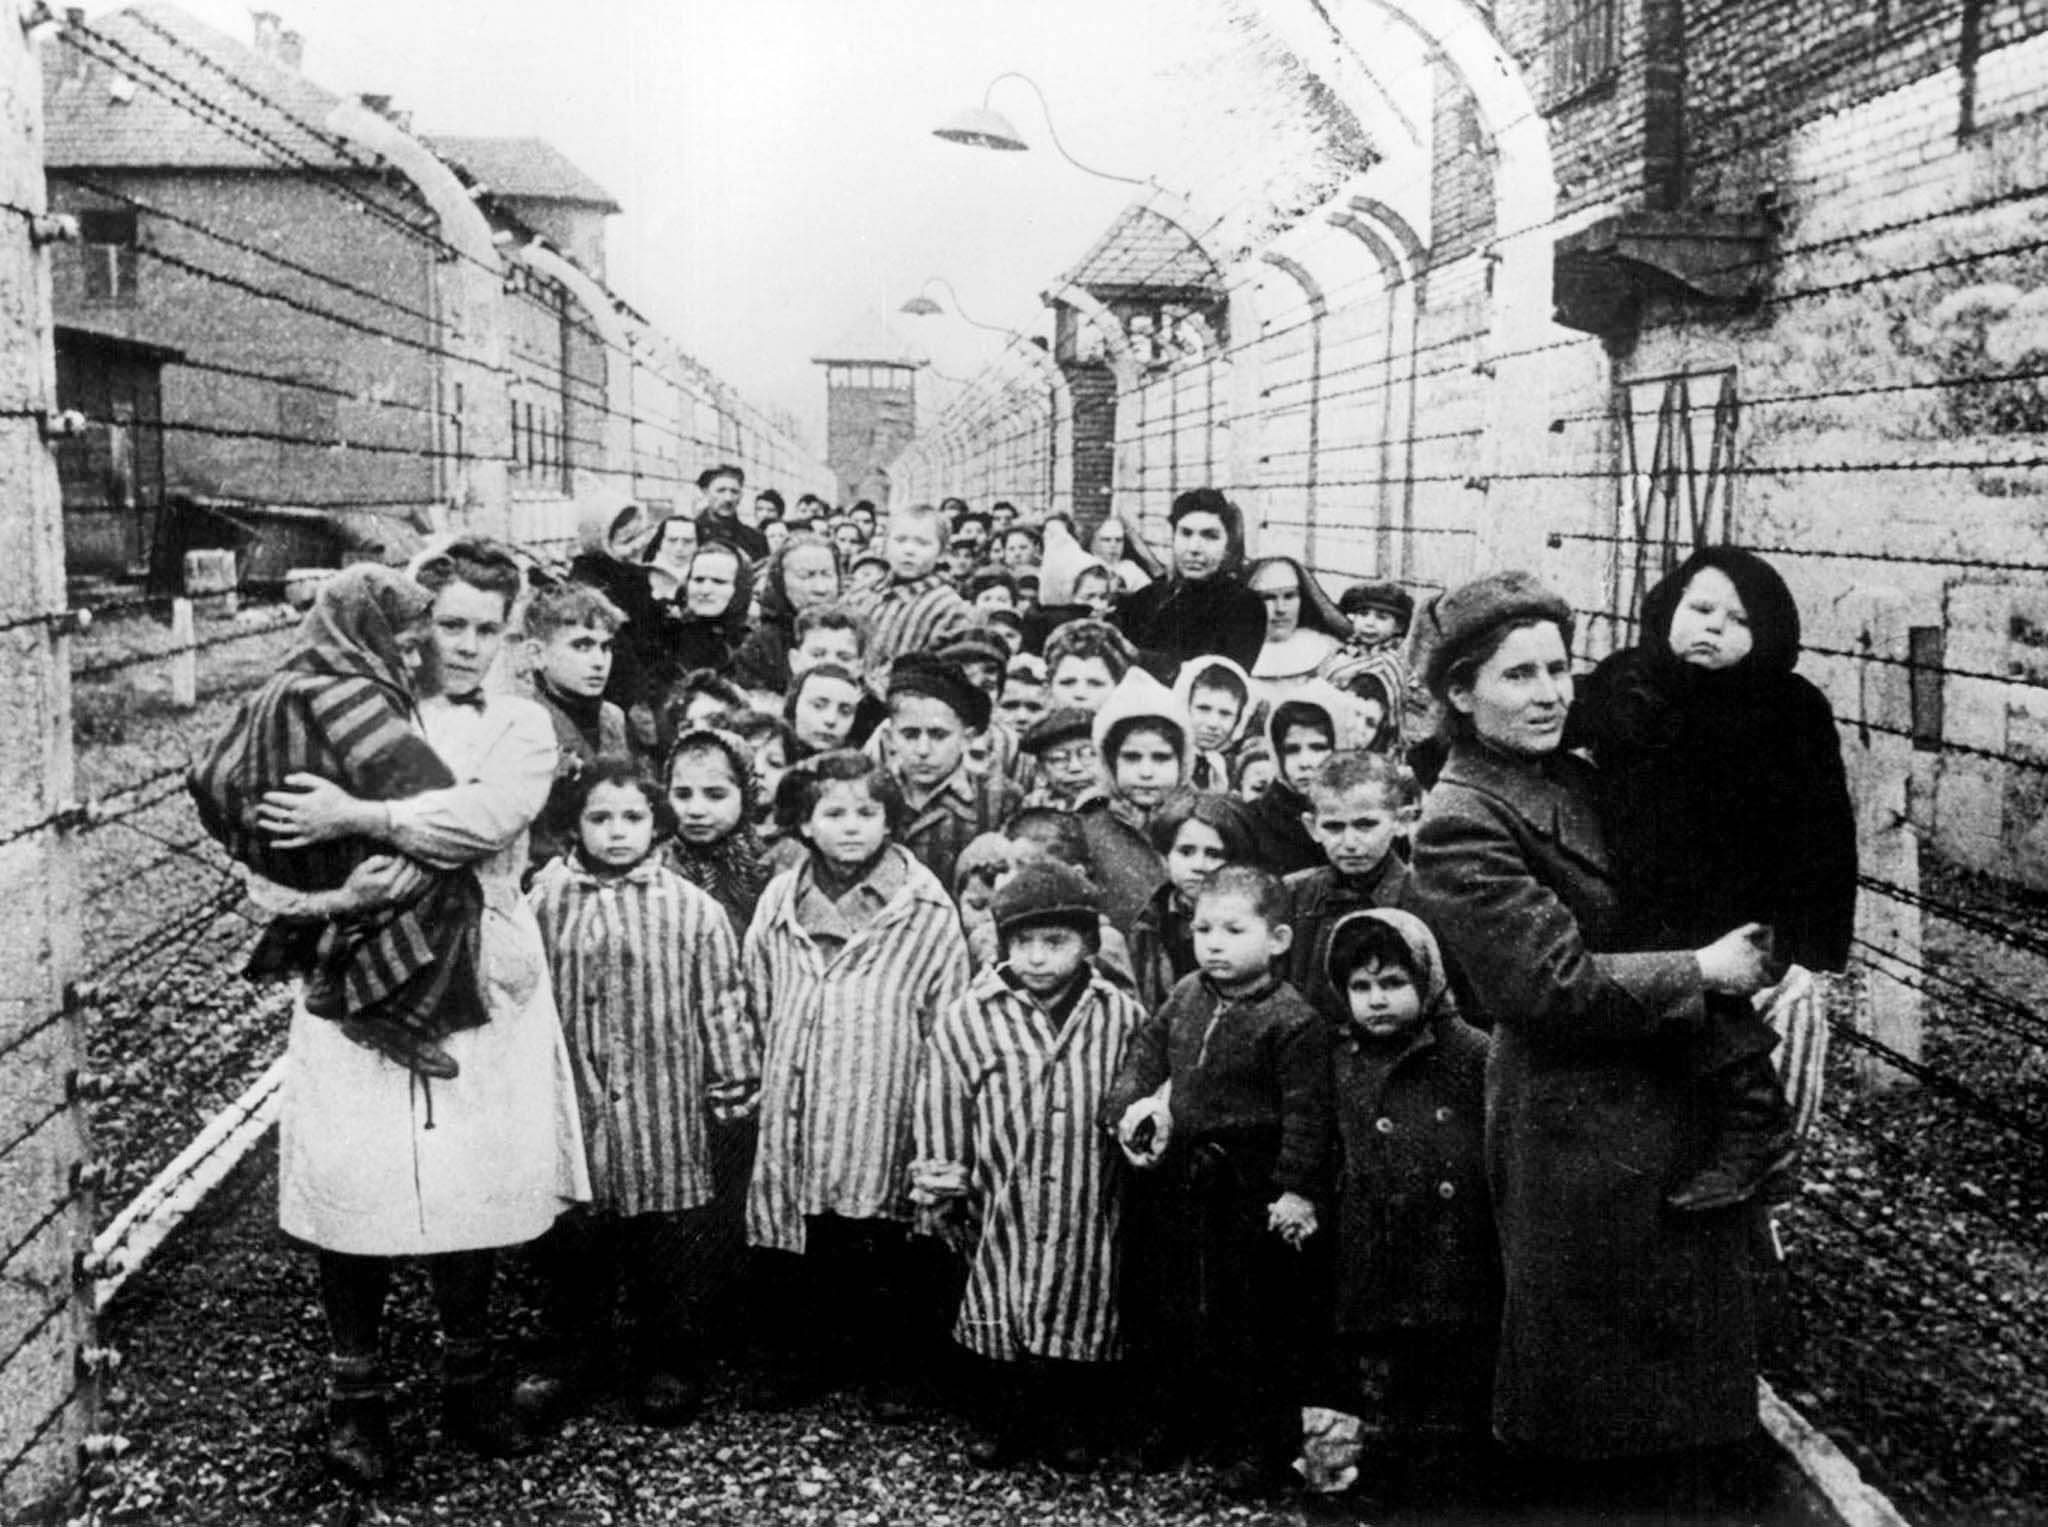 WAS02:GERMANY-DEUTSCHE-AUSCHWITZ,4FEB99 - FILE PHOTO 27JAN45 - Survivors of Auschwitz are shown during the first hours of the concentration camp's liberation by soldiers of the Soviet army, January 27, 1945. Manfred Pohl, a Deutsche Bank historian, said February 4 that Germany's largest bank, Deutsche Bank AG, lent funds to firms involved in the building of the World War Two camp. An estimated 1.5 million people were killed in the camp during World War Two. (B&W ONLY, NO SALES, NO ARCHIVES, ONLINES OUT, ONE TIME EDITORIAL USE WITHIN 90 DAYS OF TRANSMISSION) hb/Photo by B. Fishman-Corbis-Bettmann REUTERS